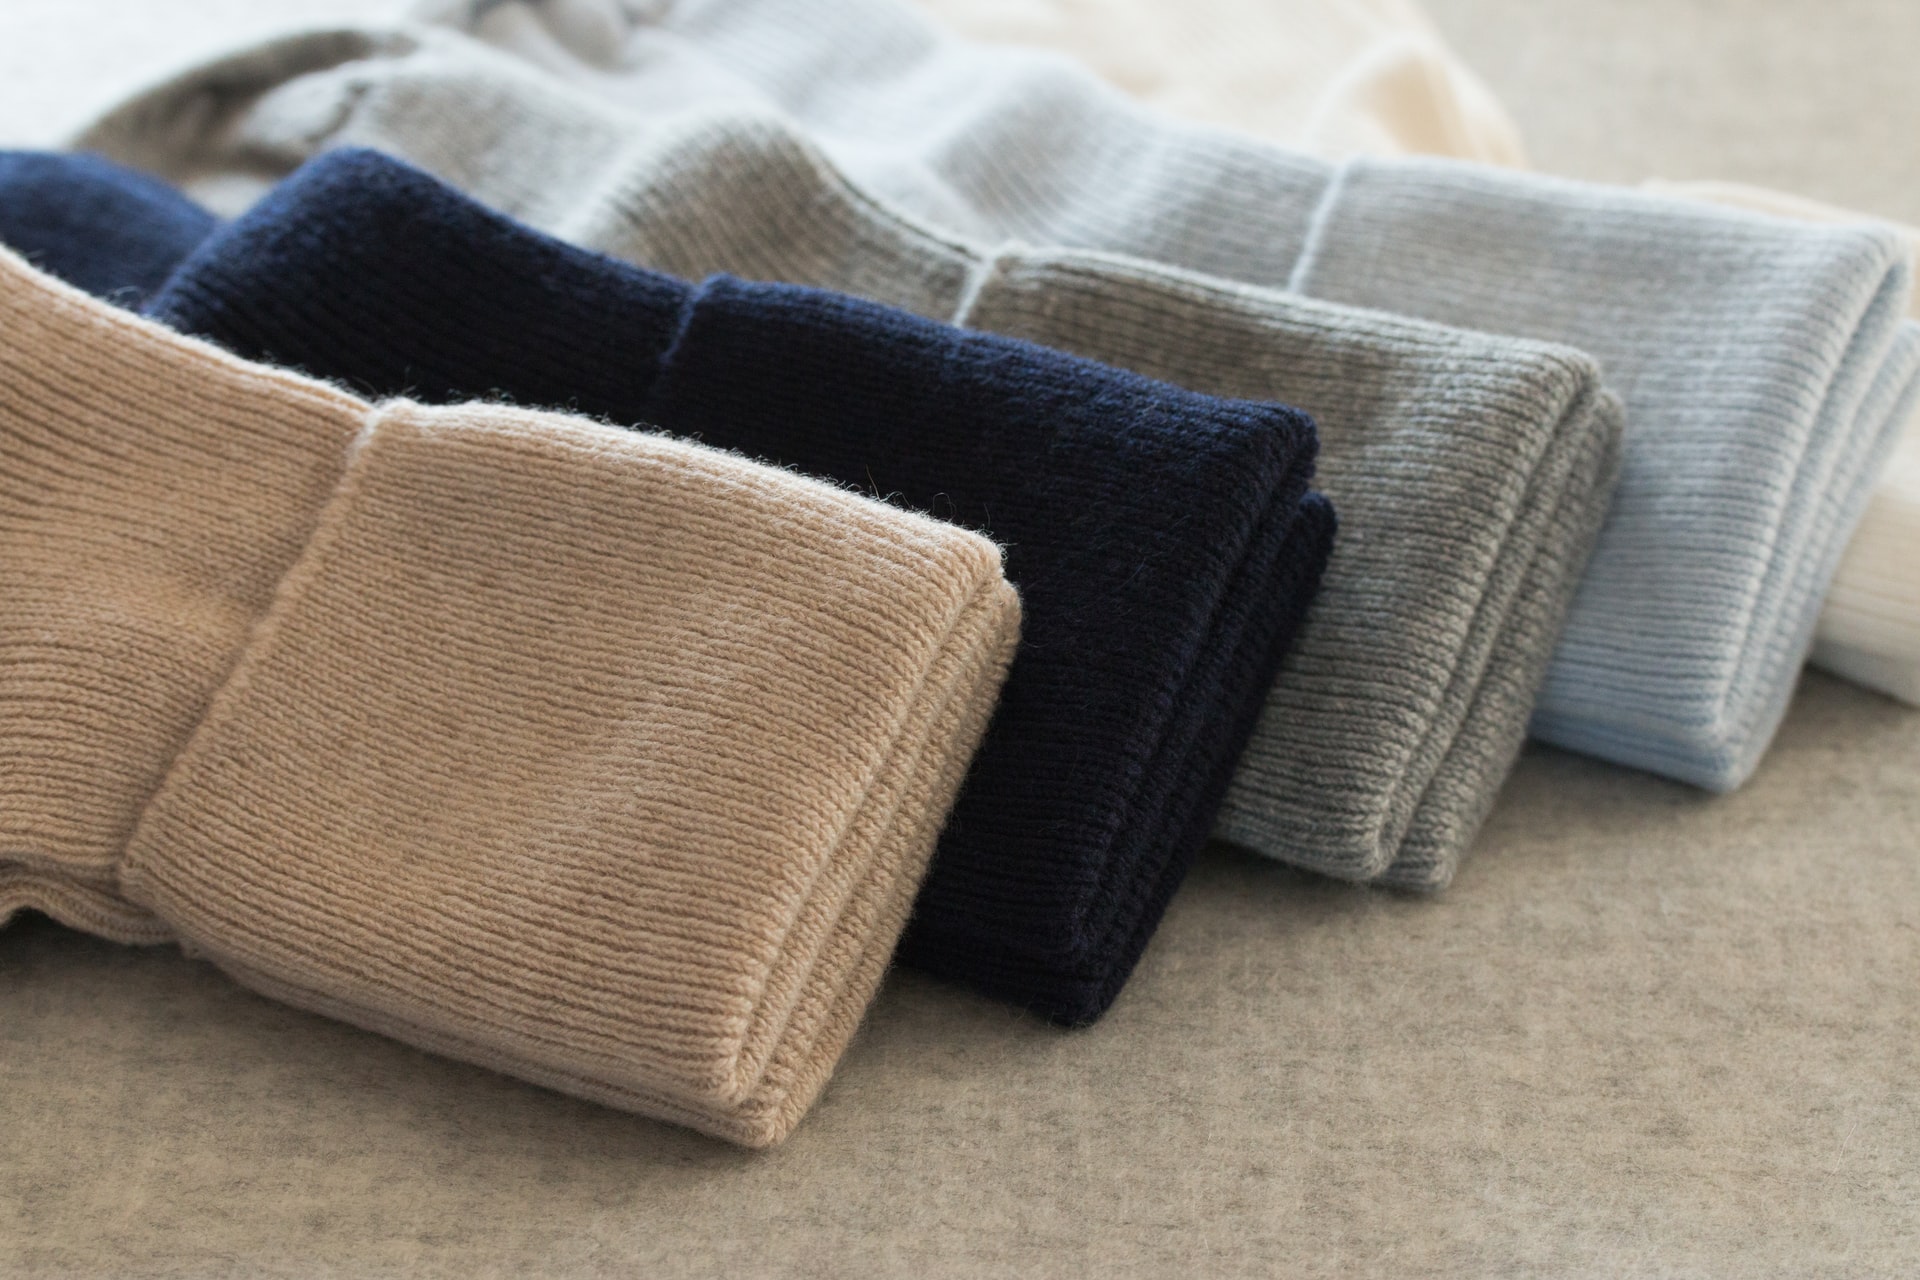 How to Repair Holes in Cashmere Sweater